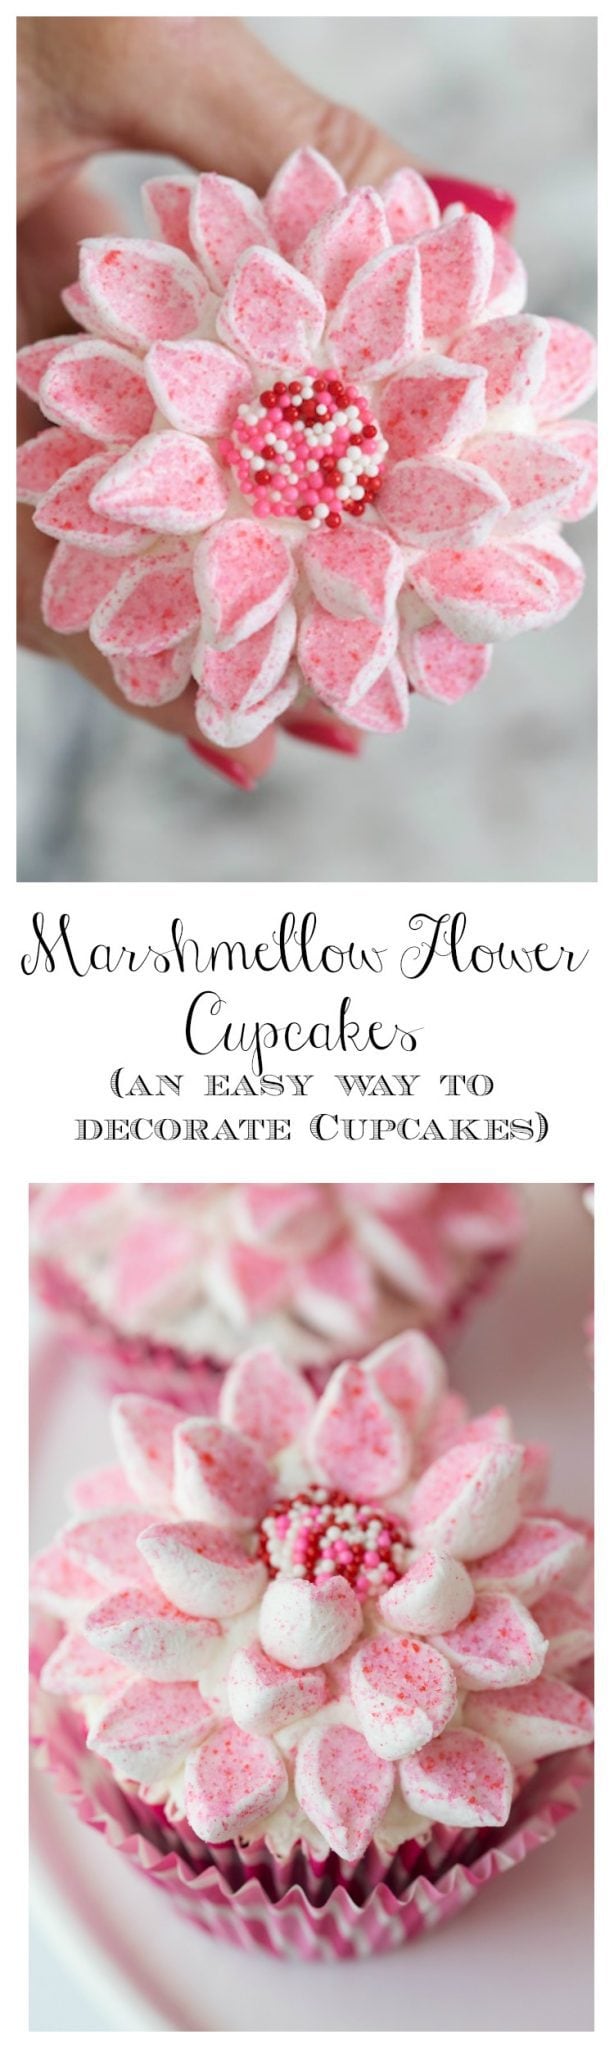 Marshmallow Flower Cupcakes - the easy way to decorate beautiful cupcakes!